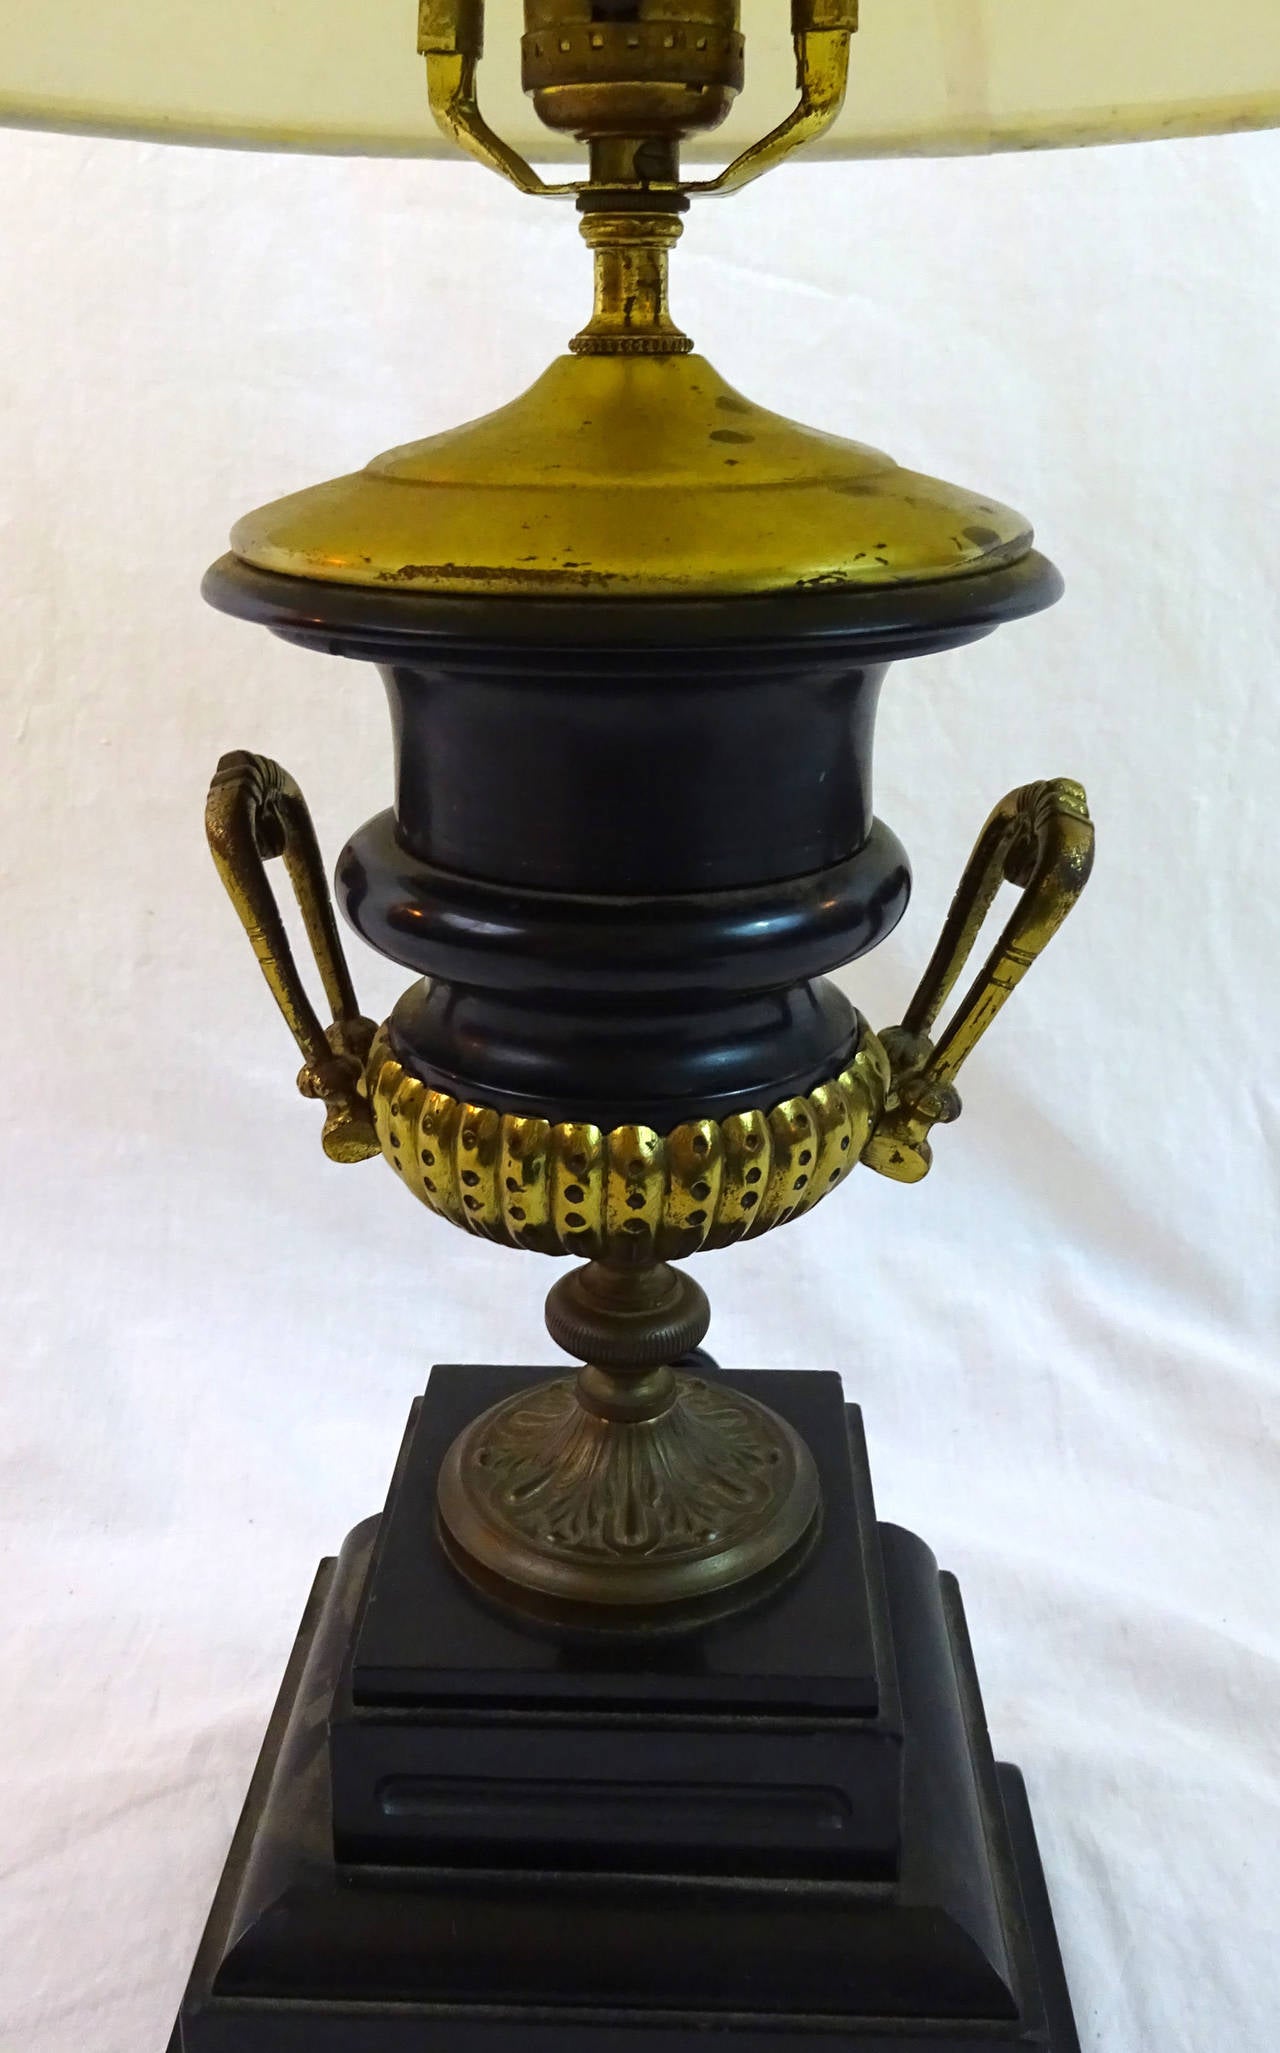 19th century spelter and bronze urn, now as a lamp on an ebonized base.